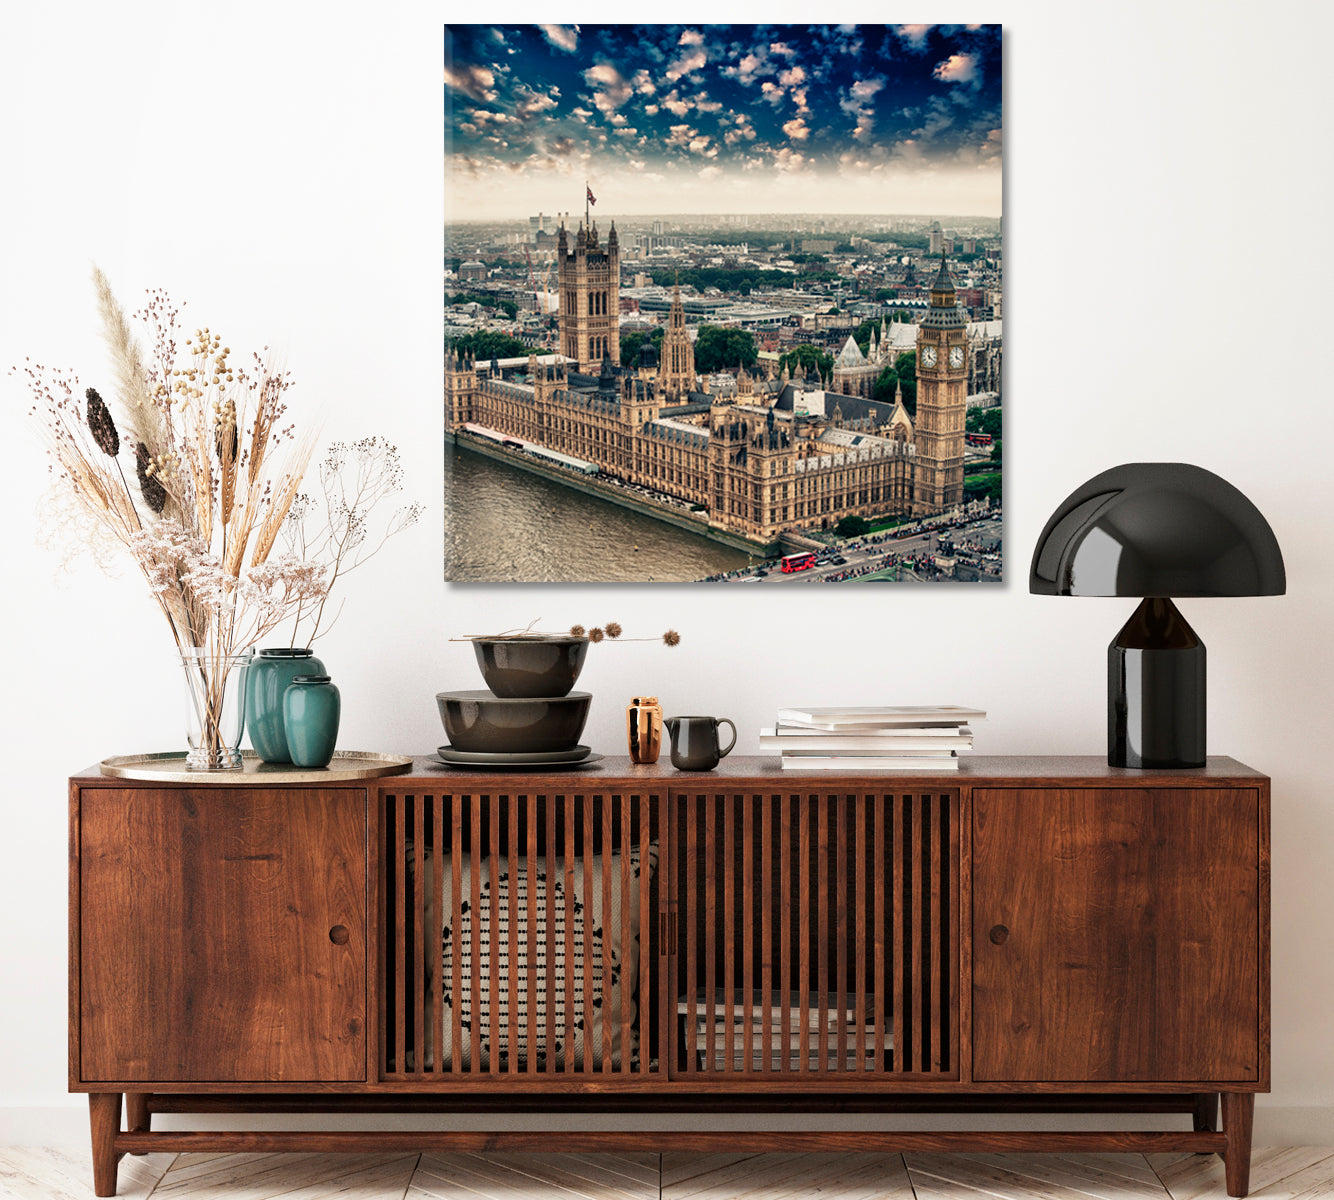 London Houses of Parliament and Big Ben Canvas Print ArtLexy 1 Panel 12"x12" inches 